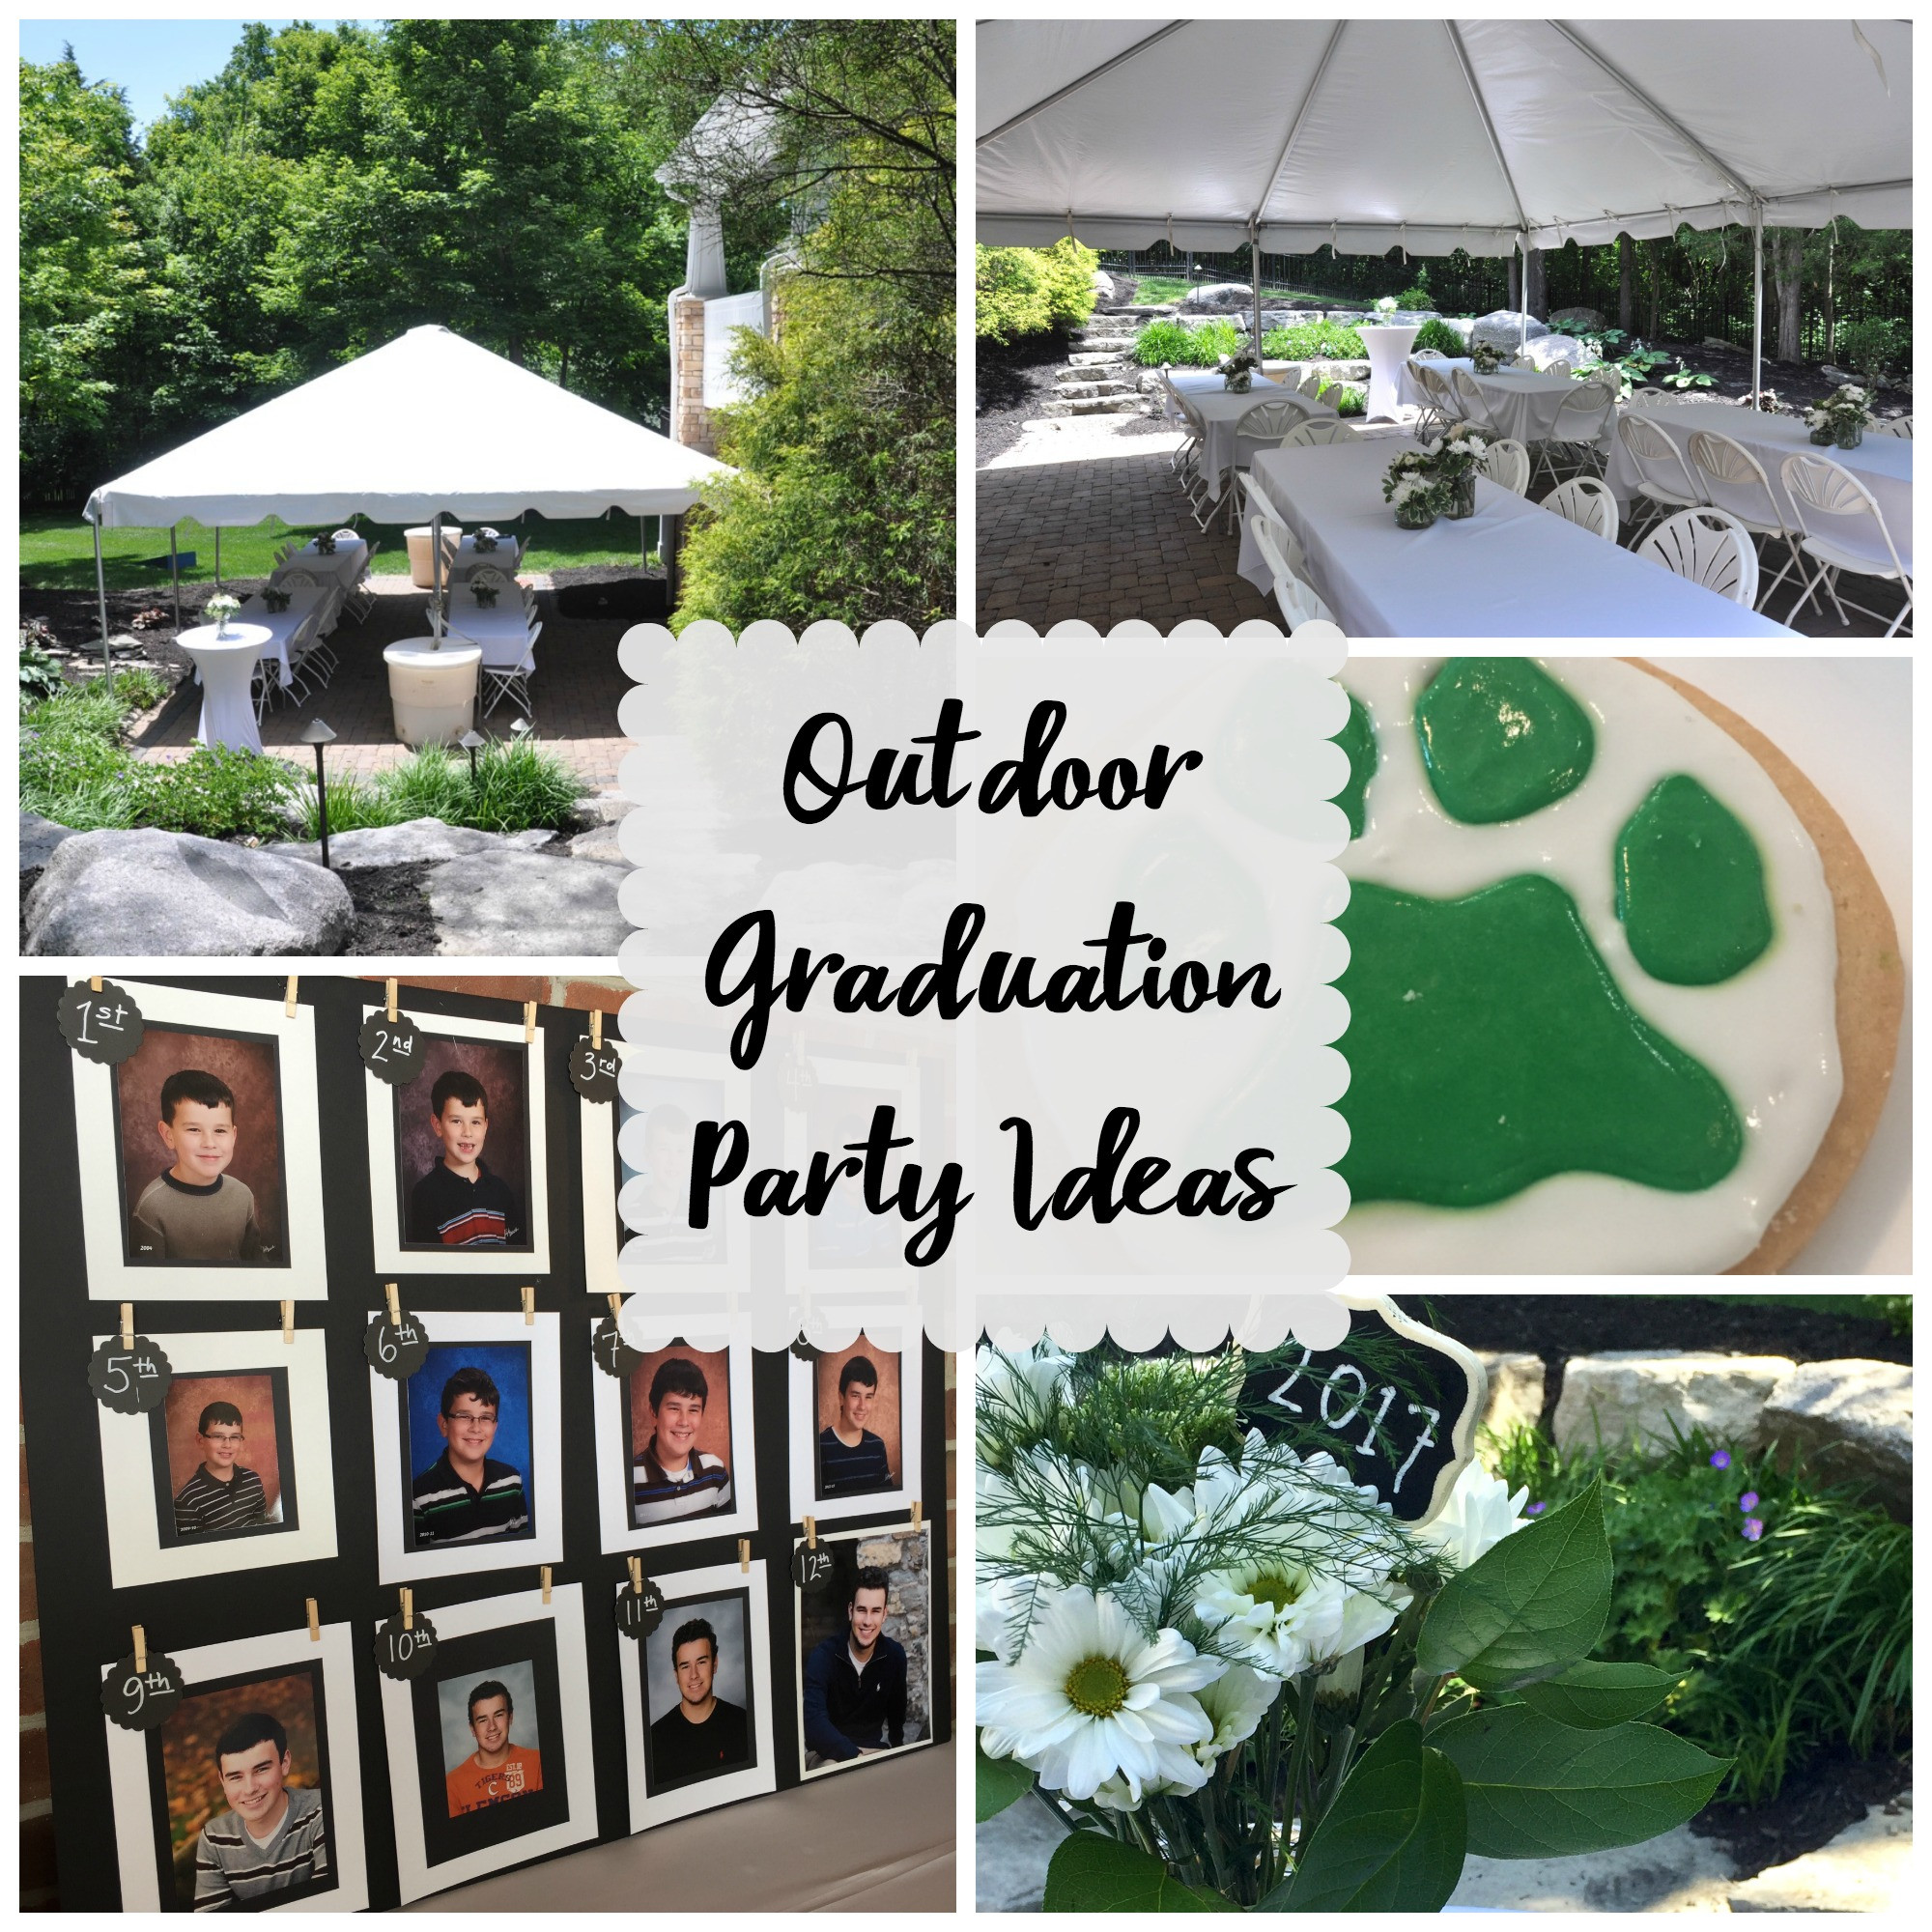 Graduation Outdoor Party Ideas
 Outdoor Graduation Party Evolution of Style